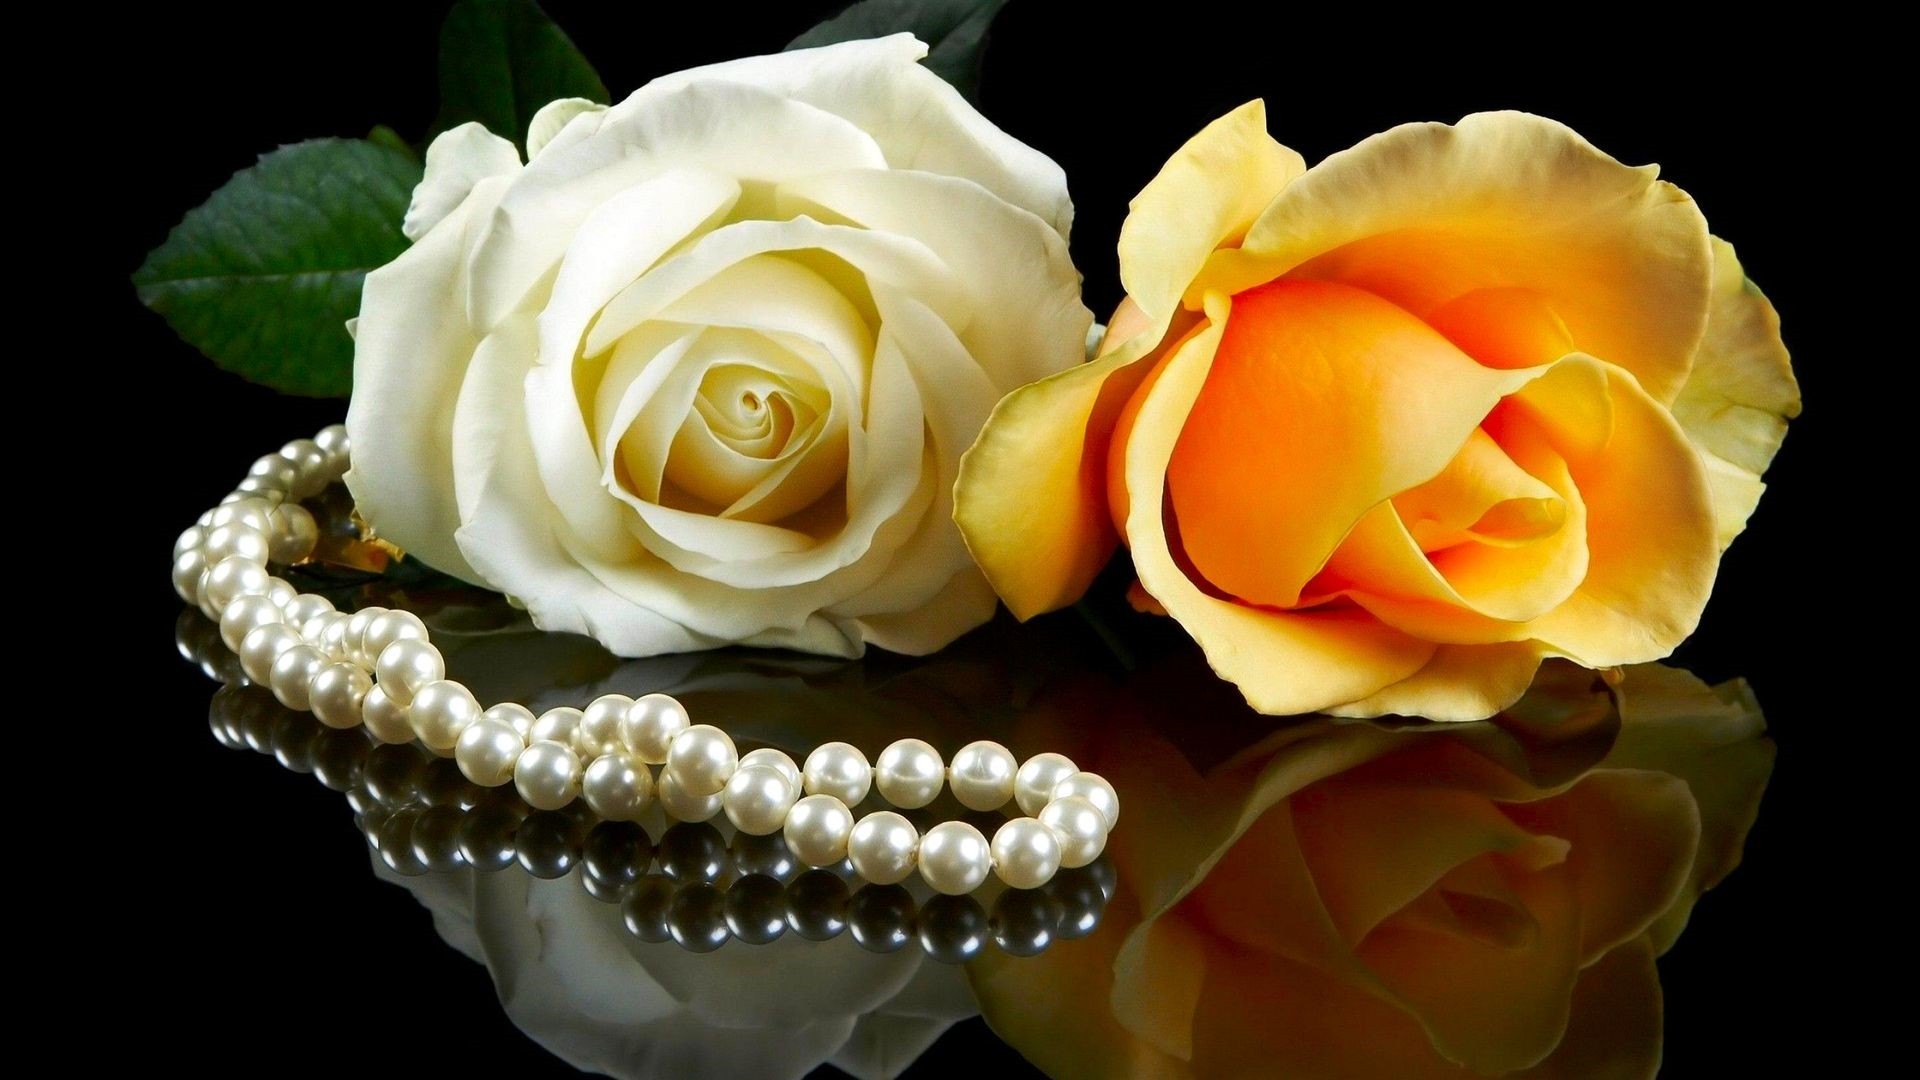 Jewelry Pearls wallpaper for pc